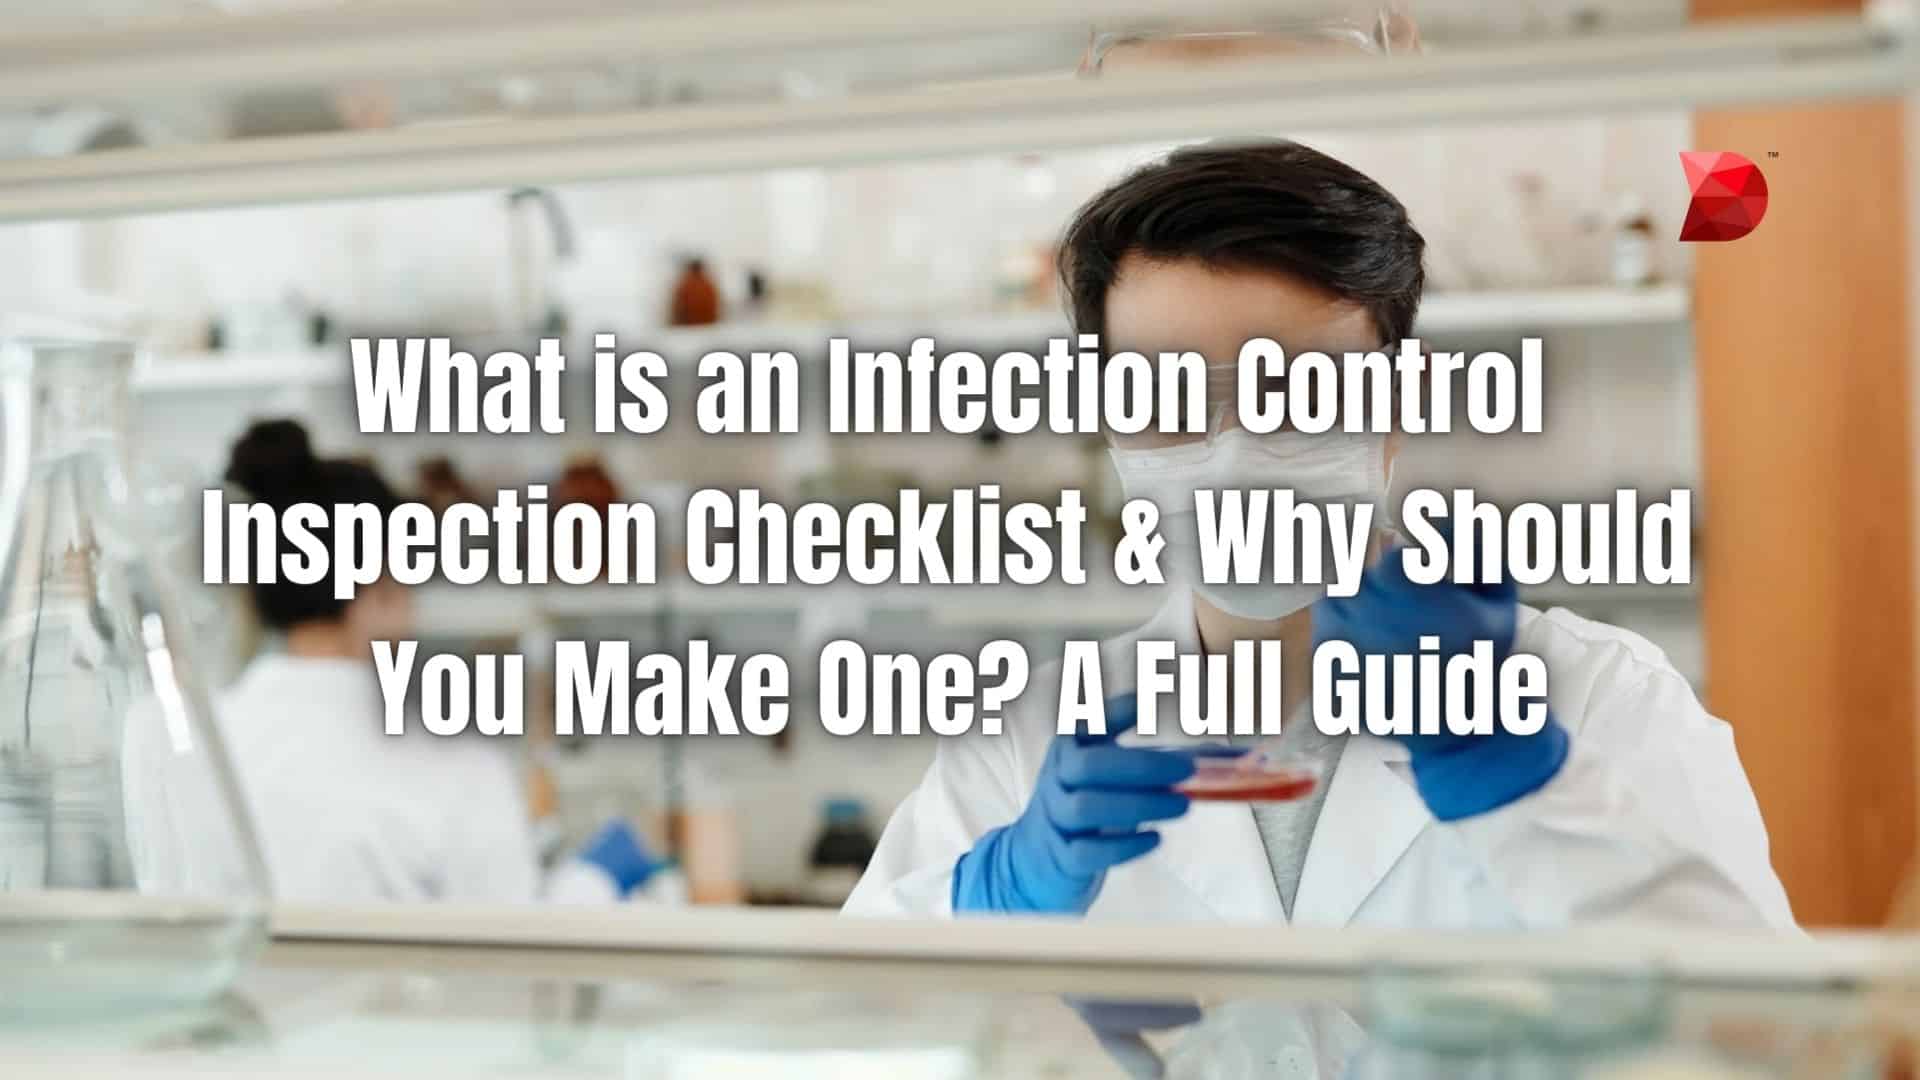 What is an Infection Control Inspection Checklist & Why Should You Make One A Full Guide